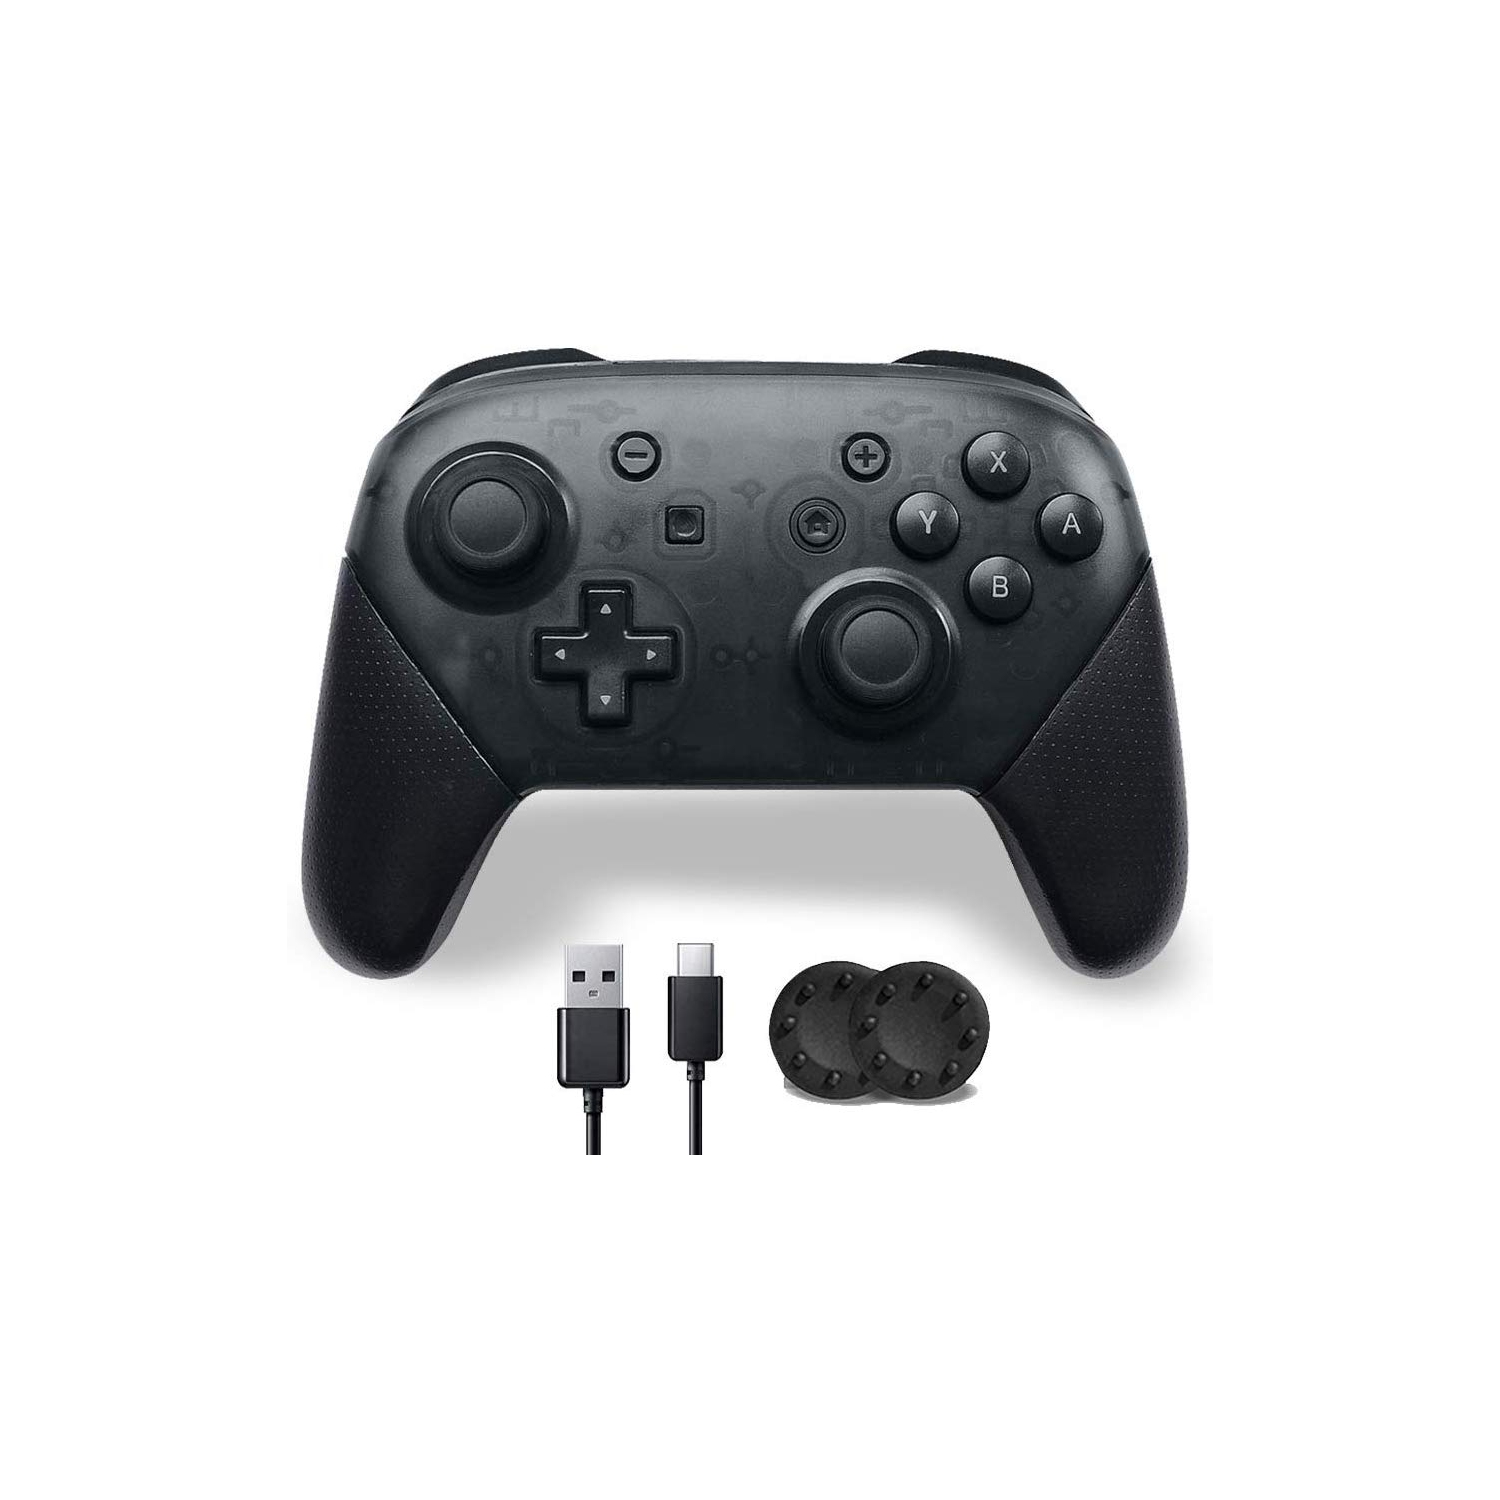 HLD Wireless Switch Pro-Style Gamepad Controller for Nintendo Switch - supports Gyro Axis, Turbo & Dual Vibration